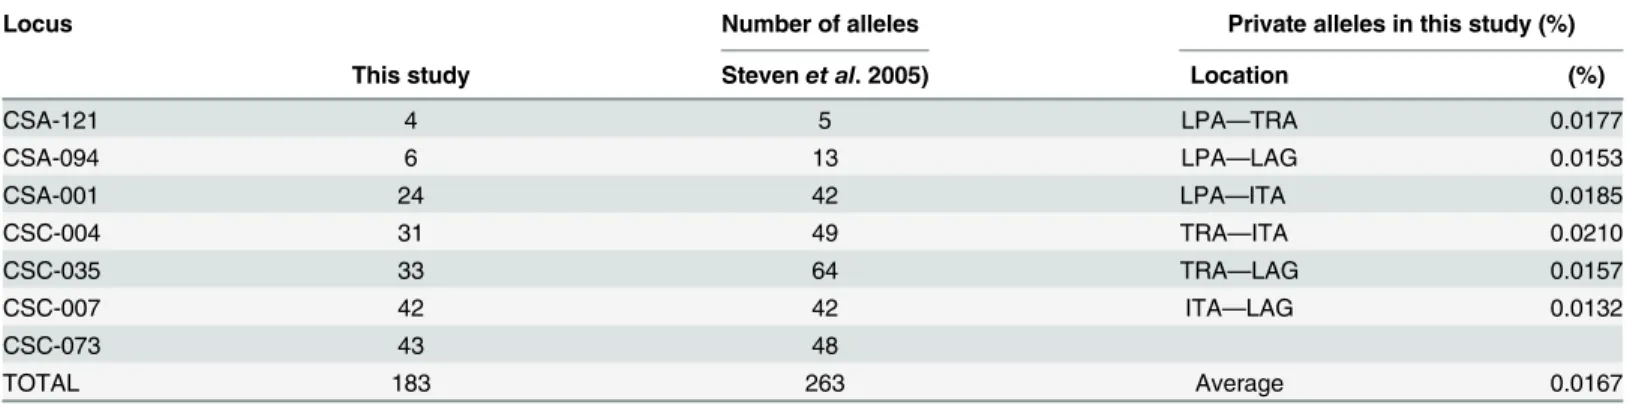 Table 3. Number of alleles to same seven loci found in this study and in Steven et al., (2005), as well as private alleles in this study, separated by pairwise populations.